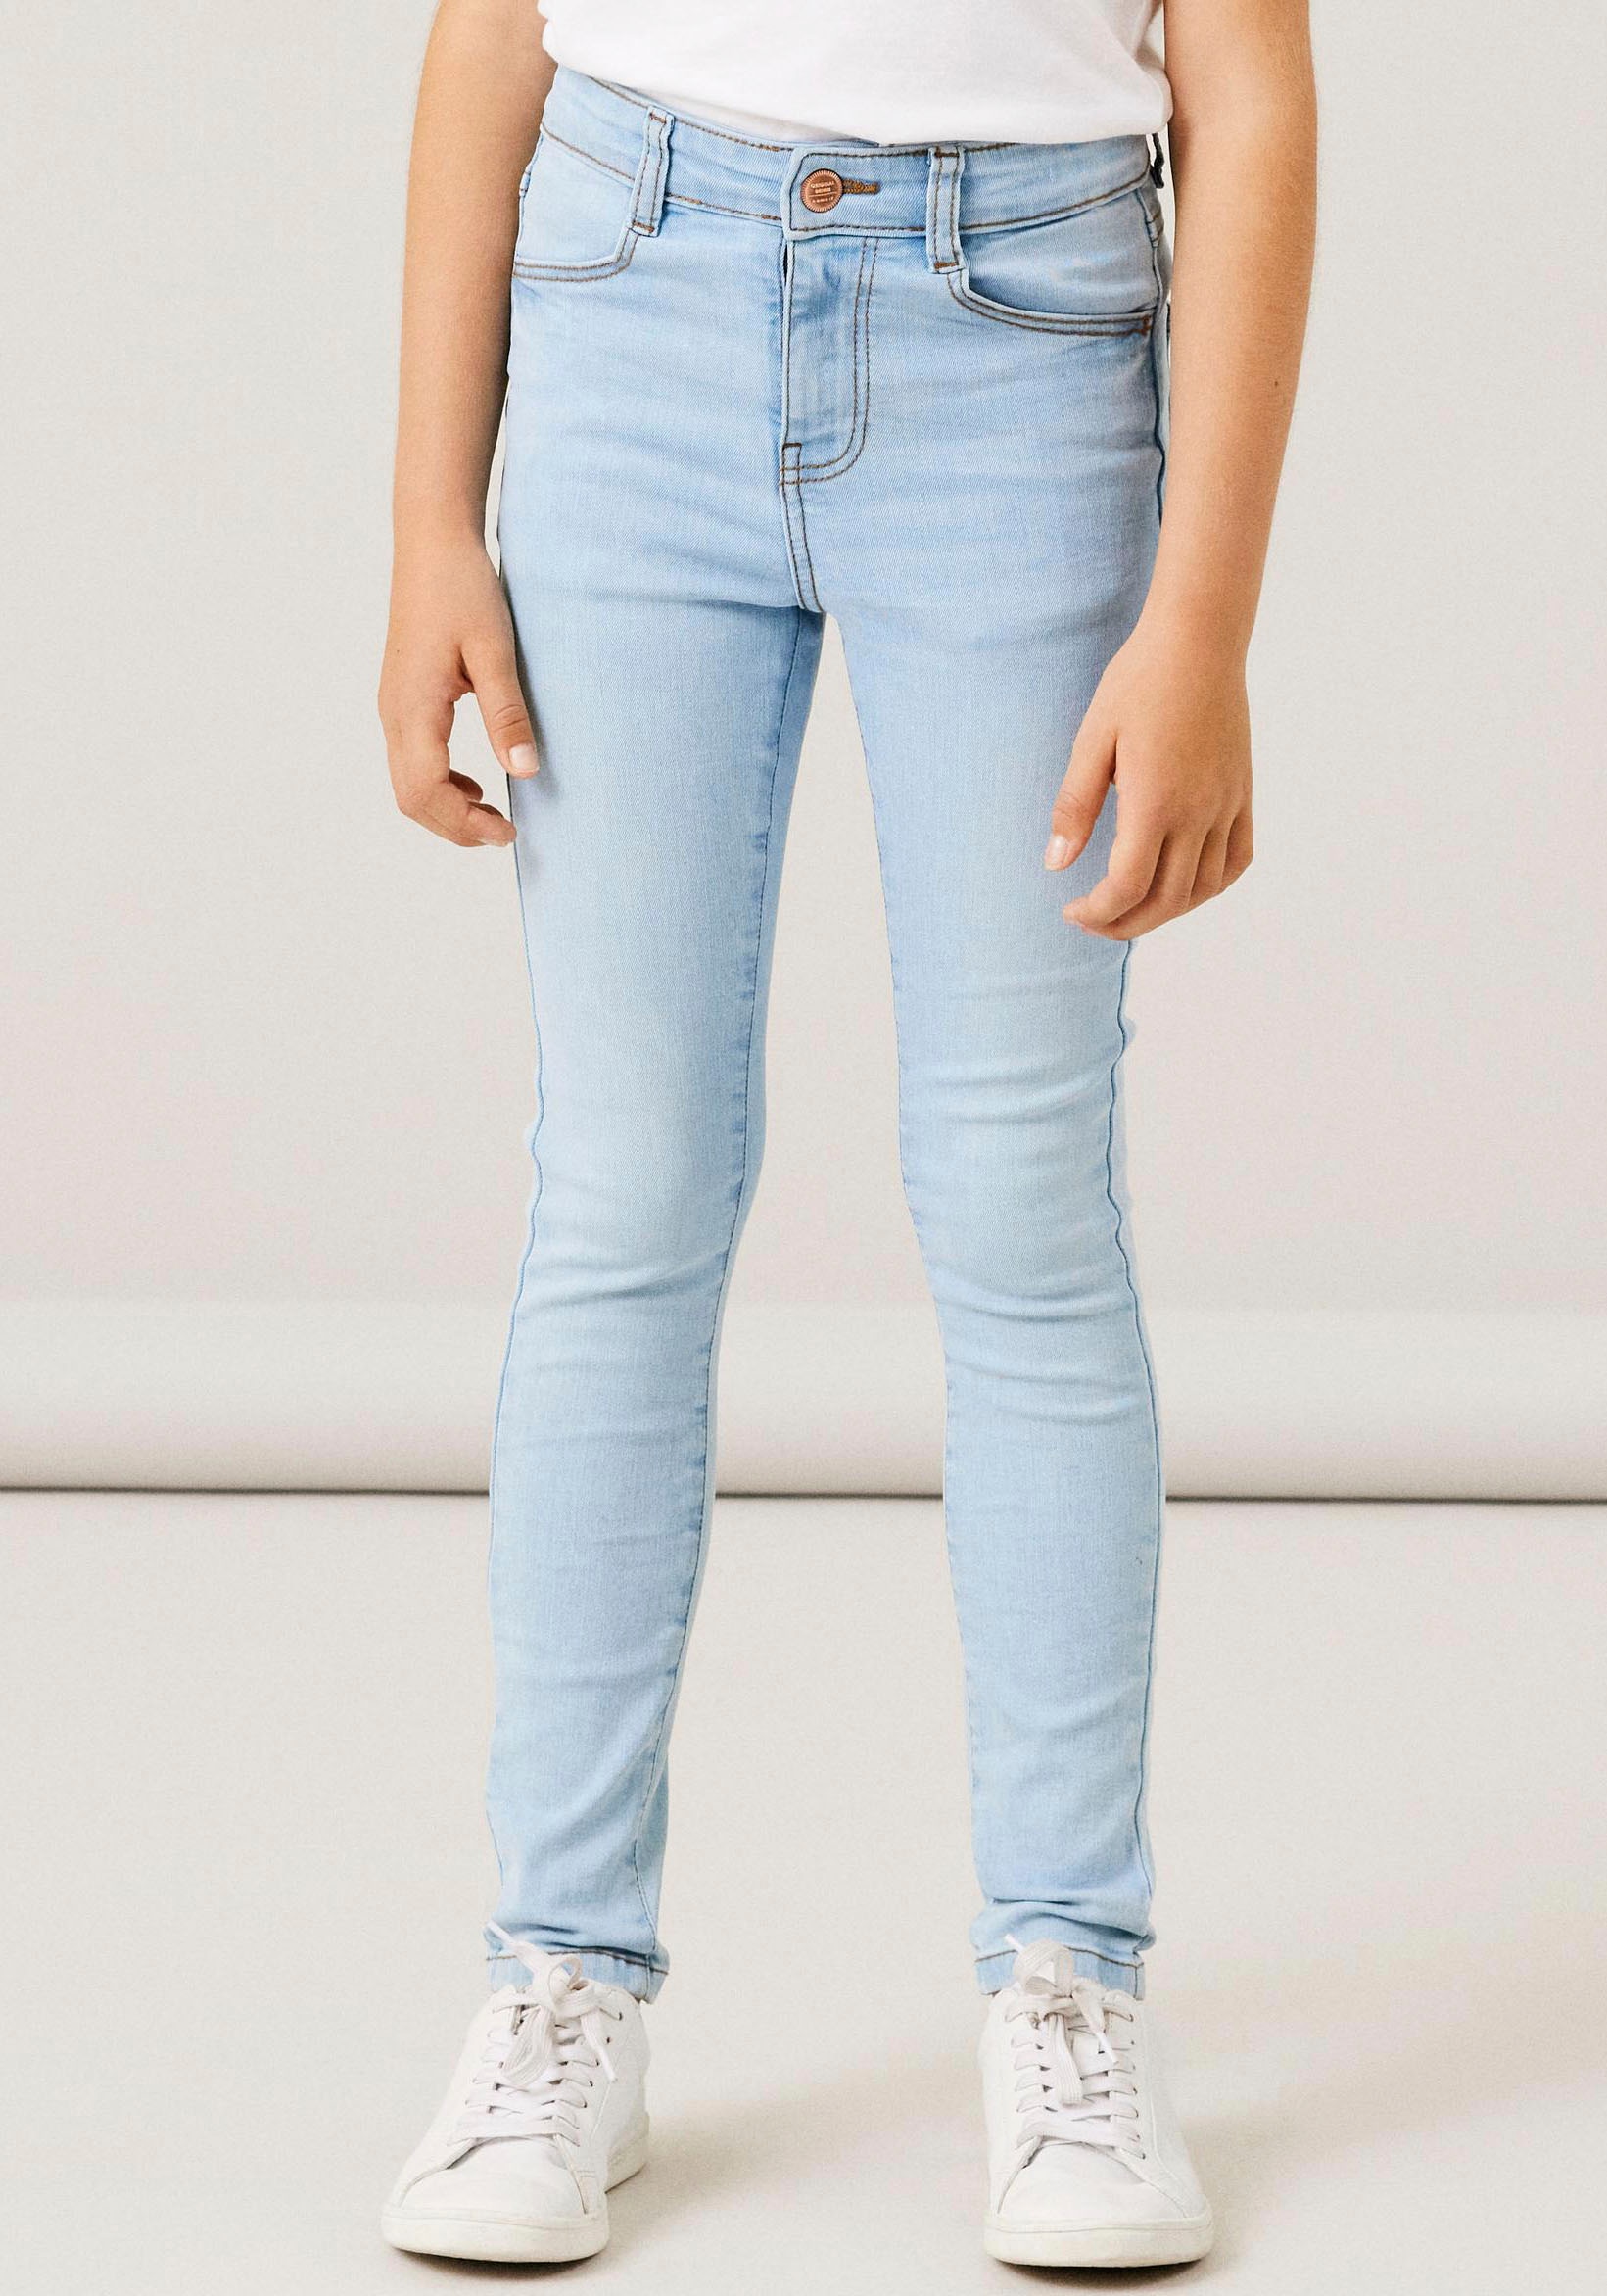 Skinny-fit-Jeans kaufen »NKFPOLLY JEANS bei 1180-ST HW NOOS«, Stretch SKINNY It Name OTTO mit